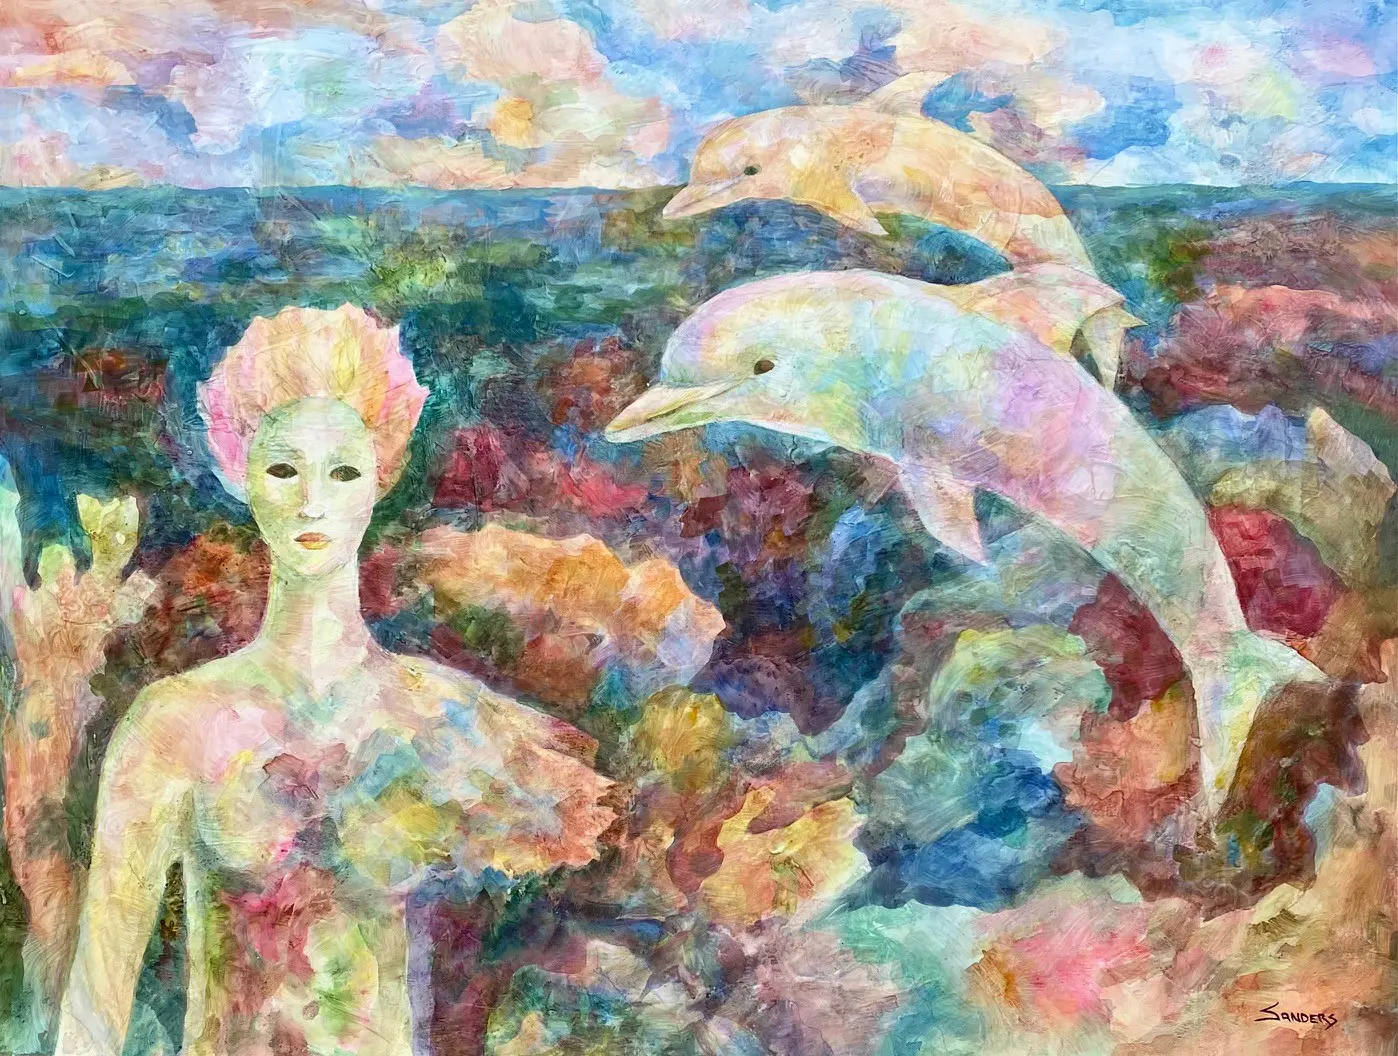 A painting of a woman and two dolphins